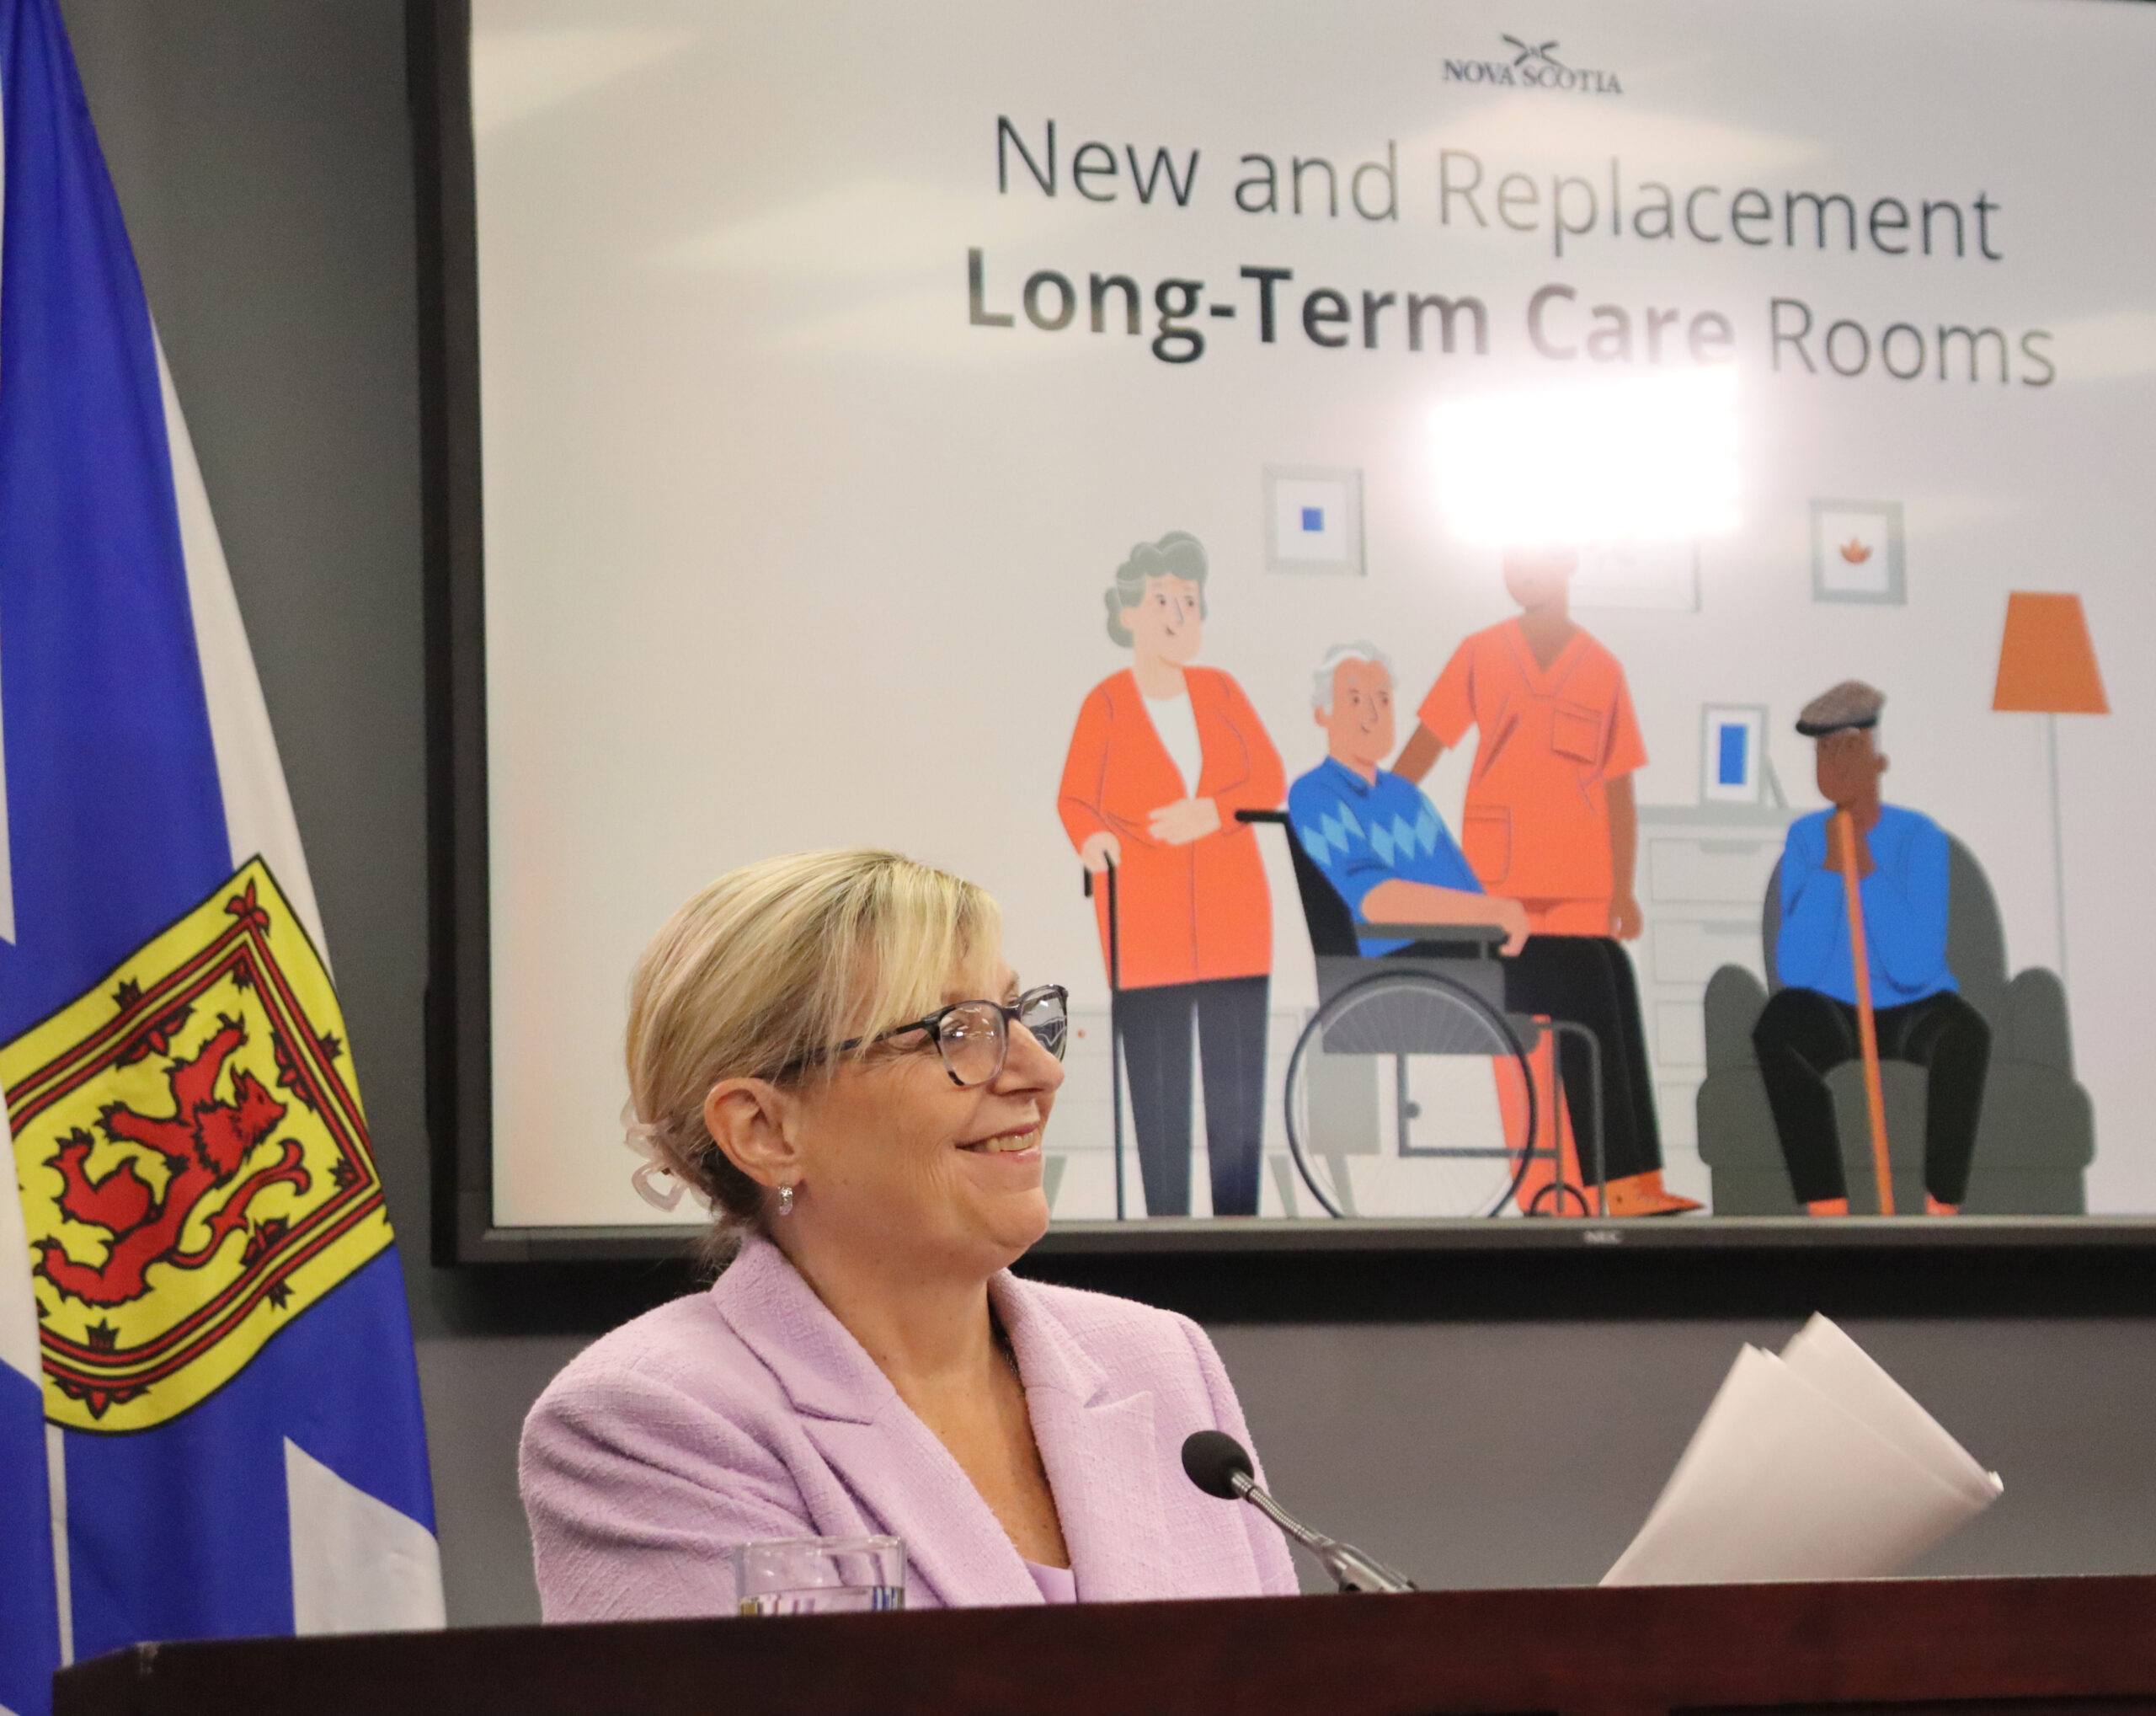 A woman smiling in front of a projector that has the words "New and Replacement Long-Term Care Rooms"